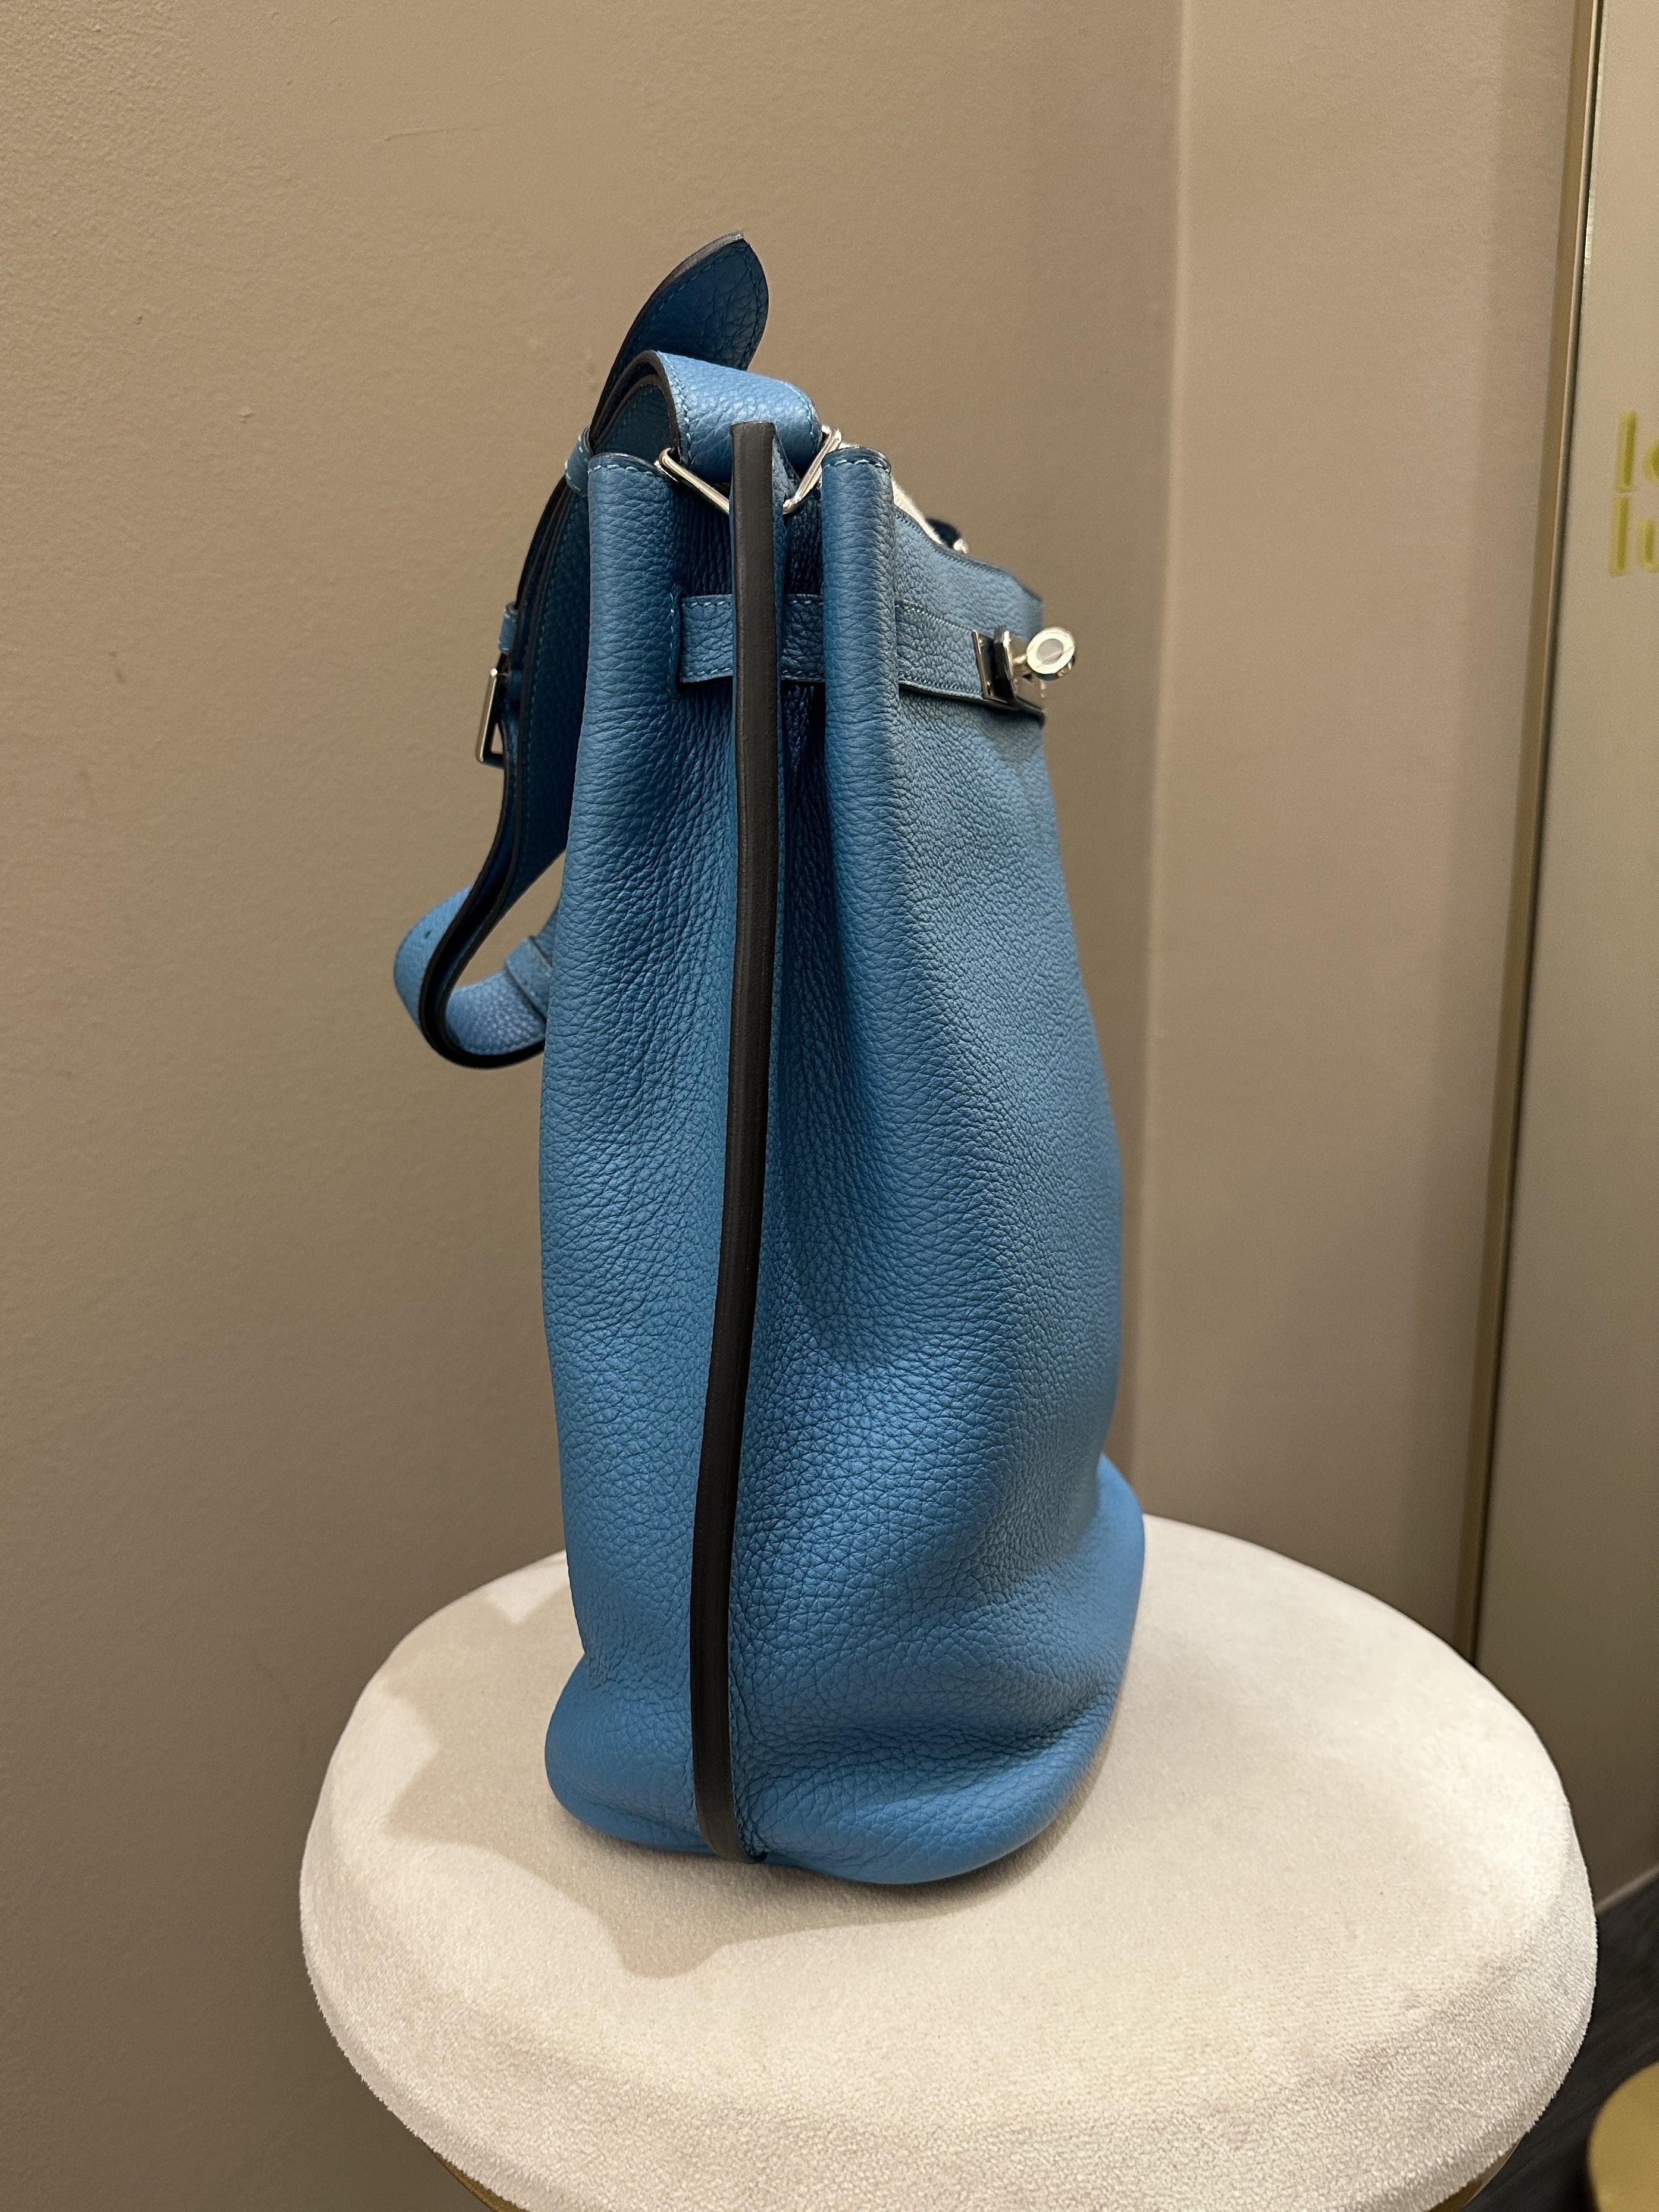 Hermes So Kelly 22 Togo Blue Colvert / Turquoise SHW Stamp T